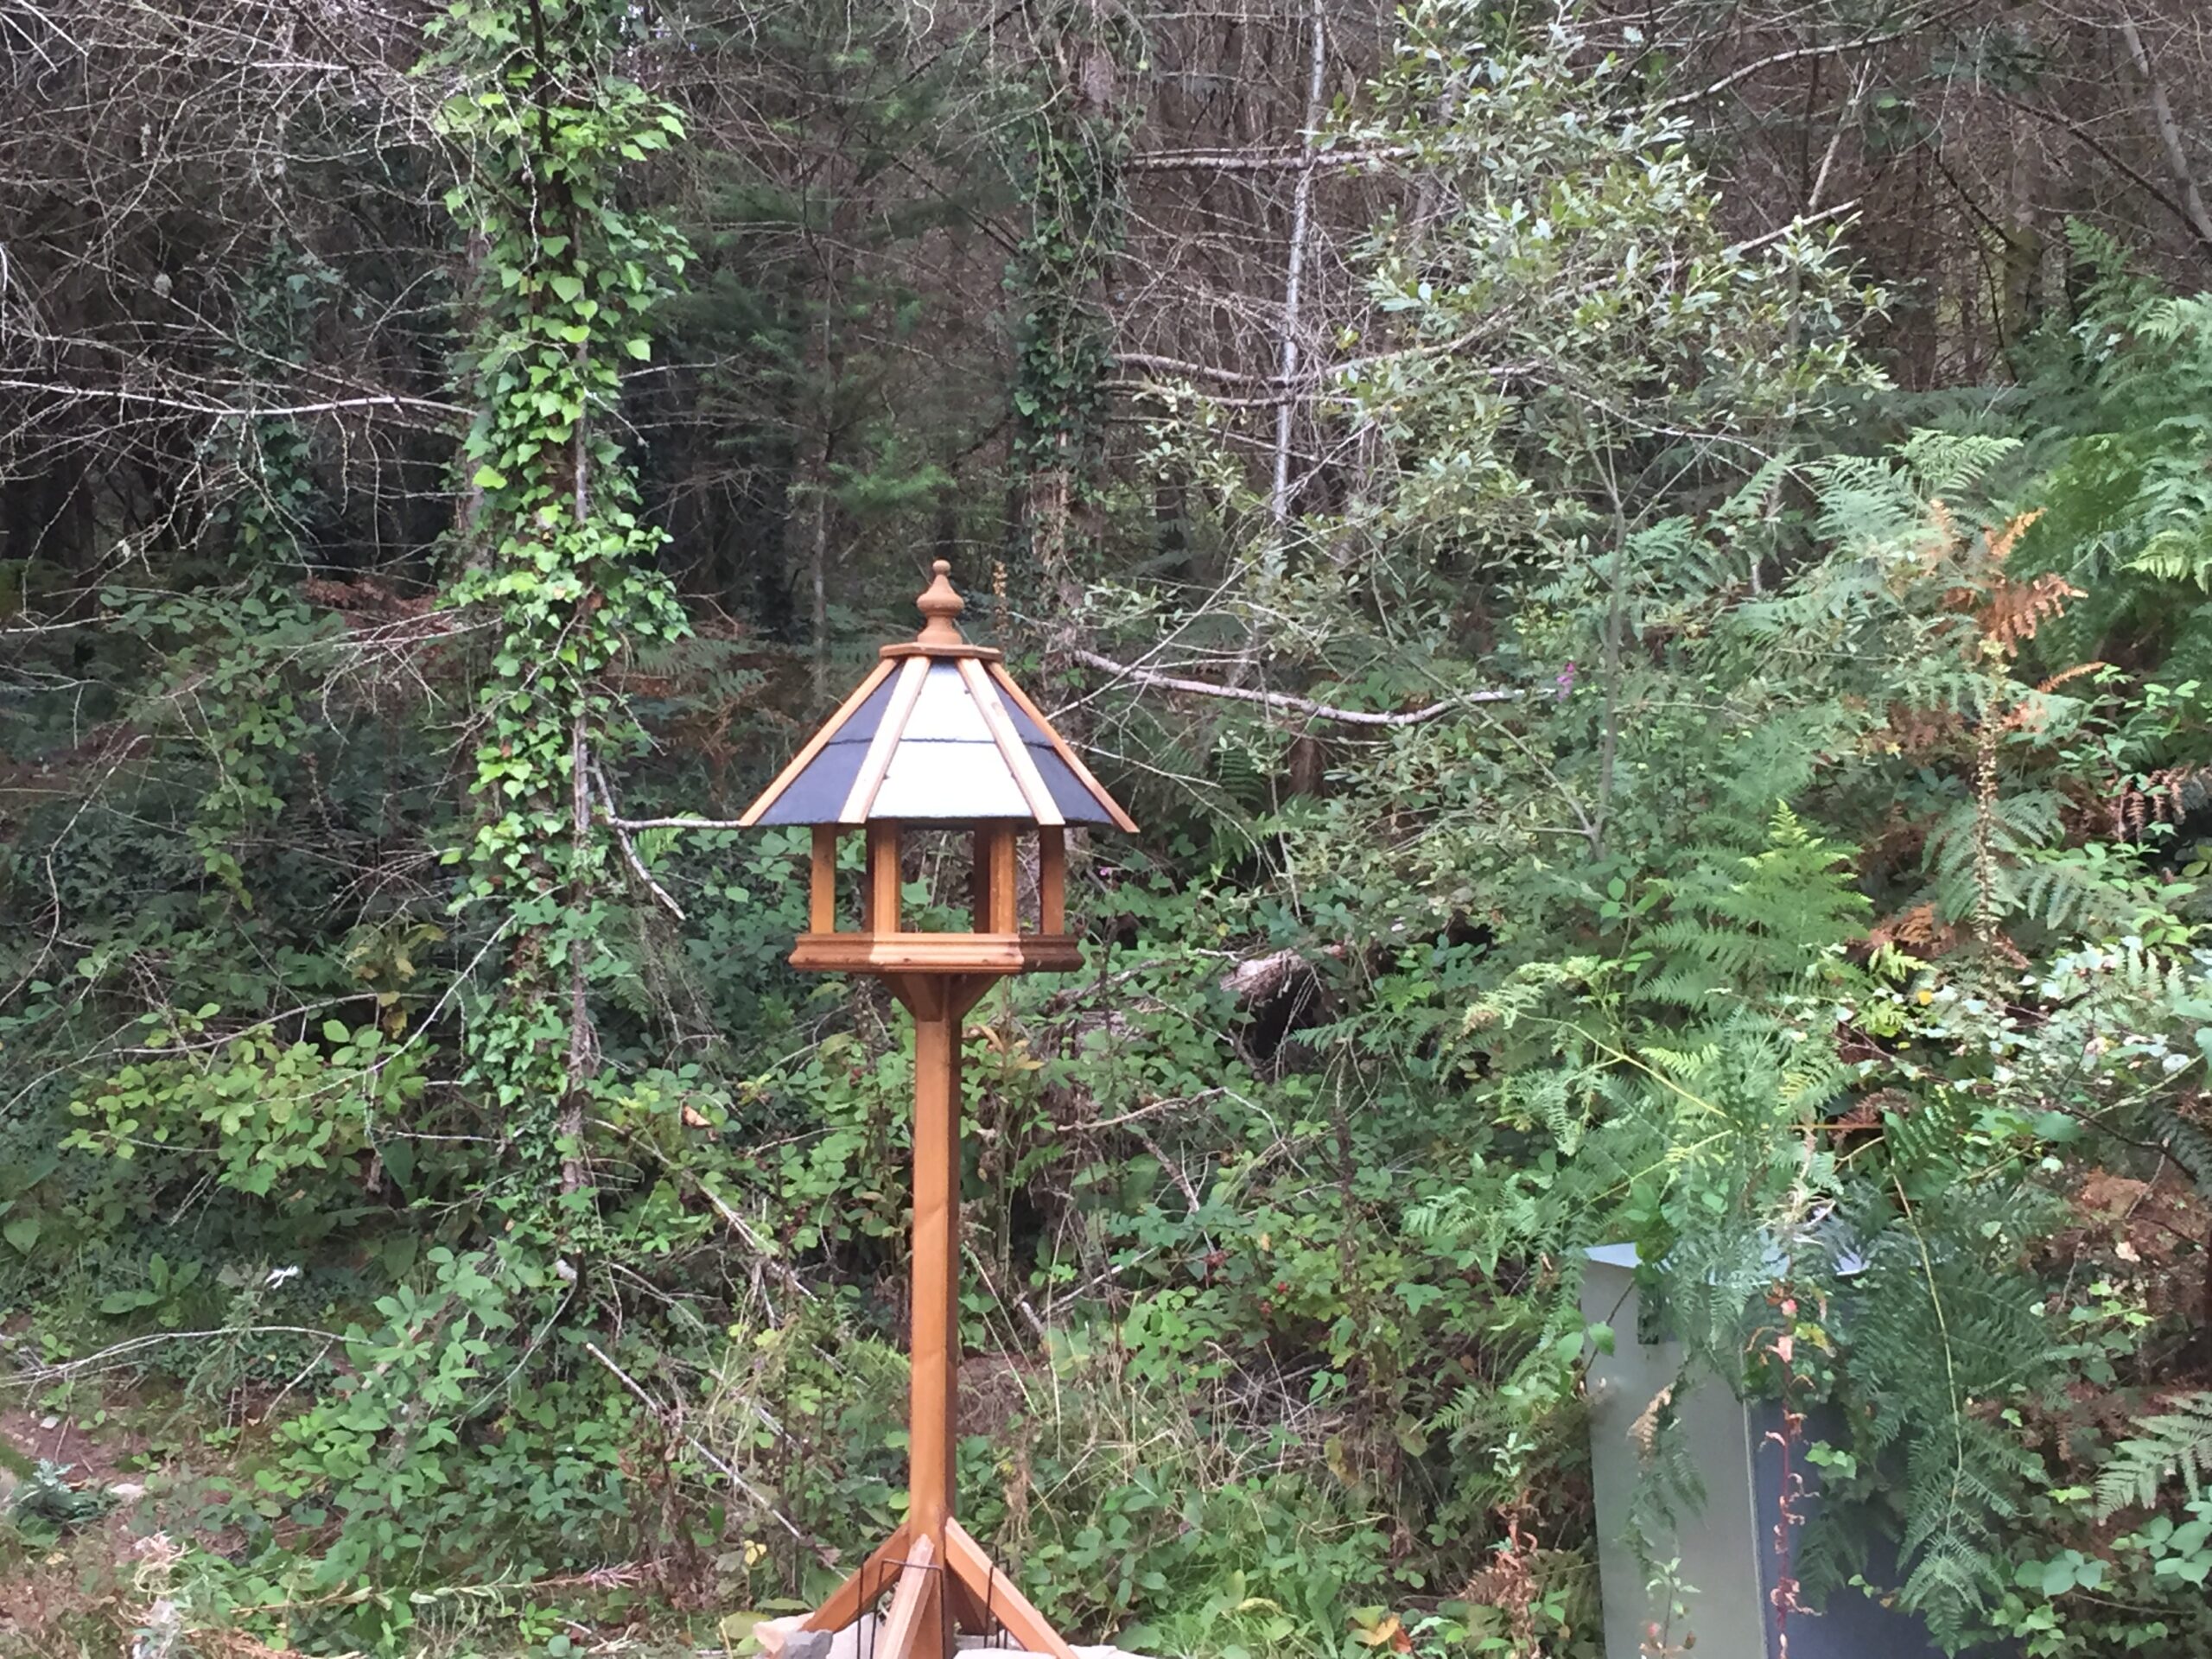 Photography of a wooden upright bird feeding table against a forest background